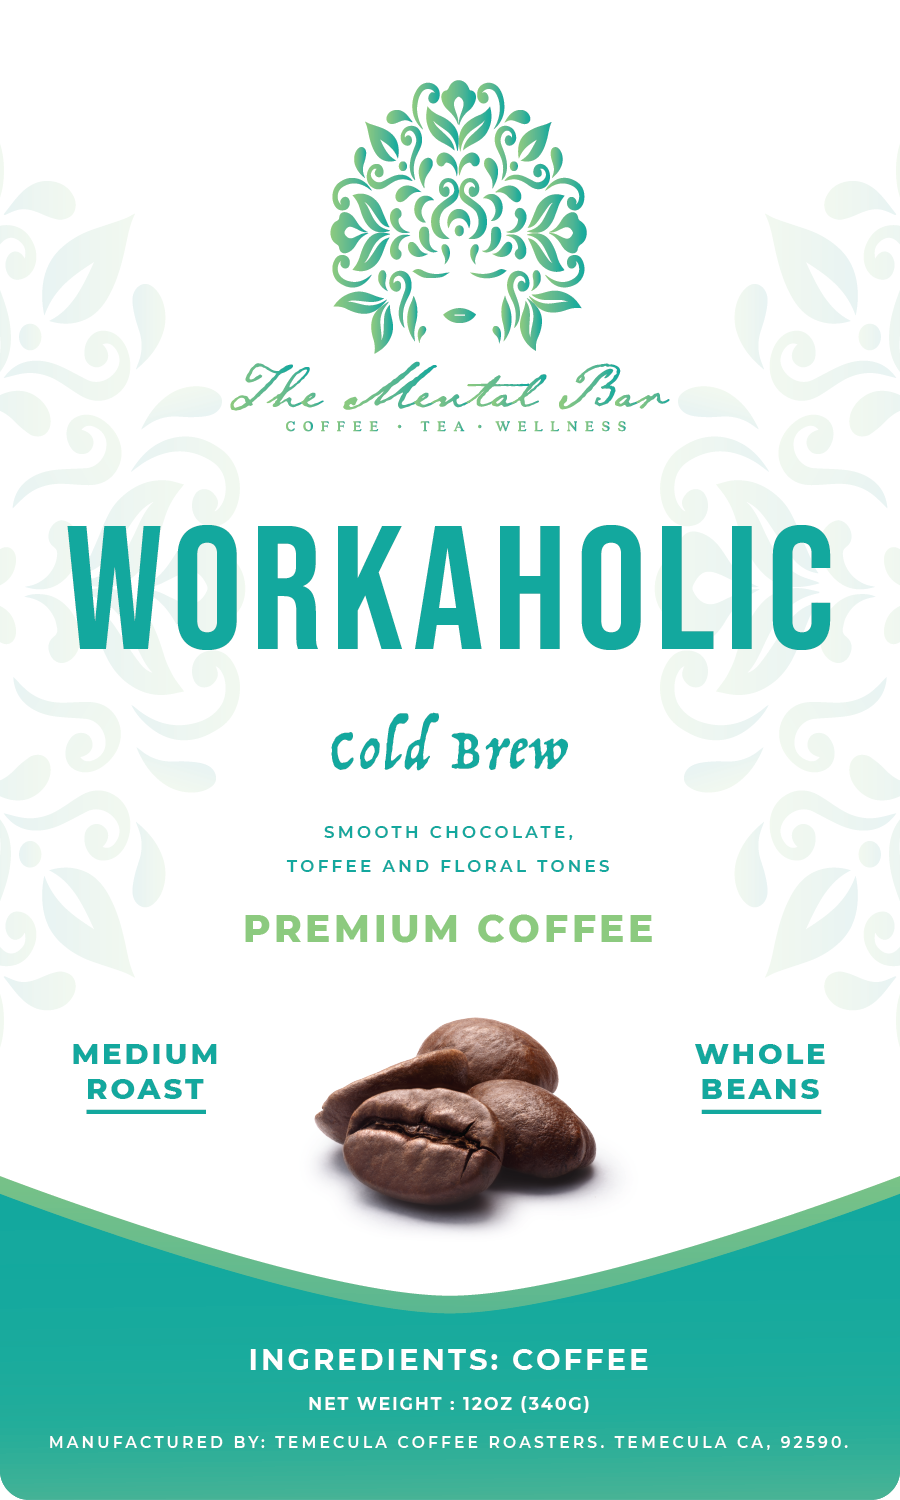 Workaholic (Cold Brew) - The Mental Bar